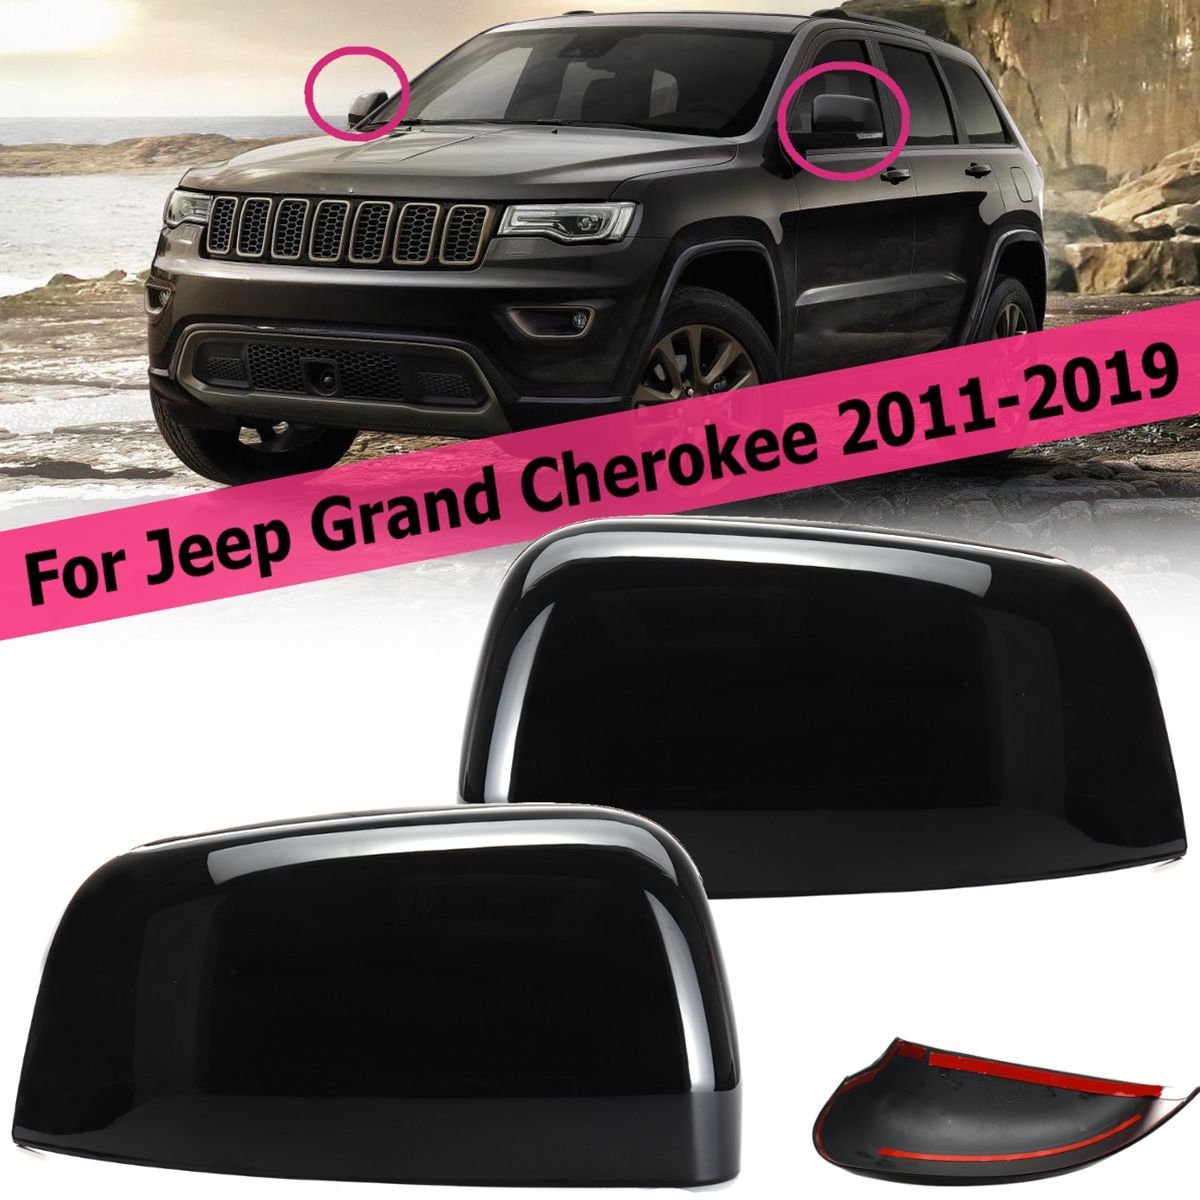 2Pcs-Car-Glossy-Black-ABS-Side-Mirror-Cover-Caps-For-Jeep-Grand-Cherokee-2011-2019-1413181